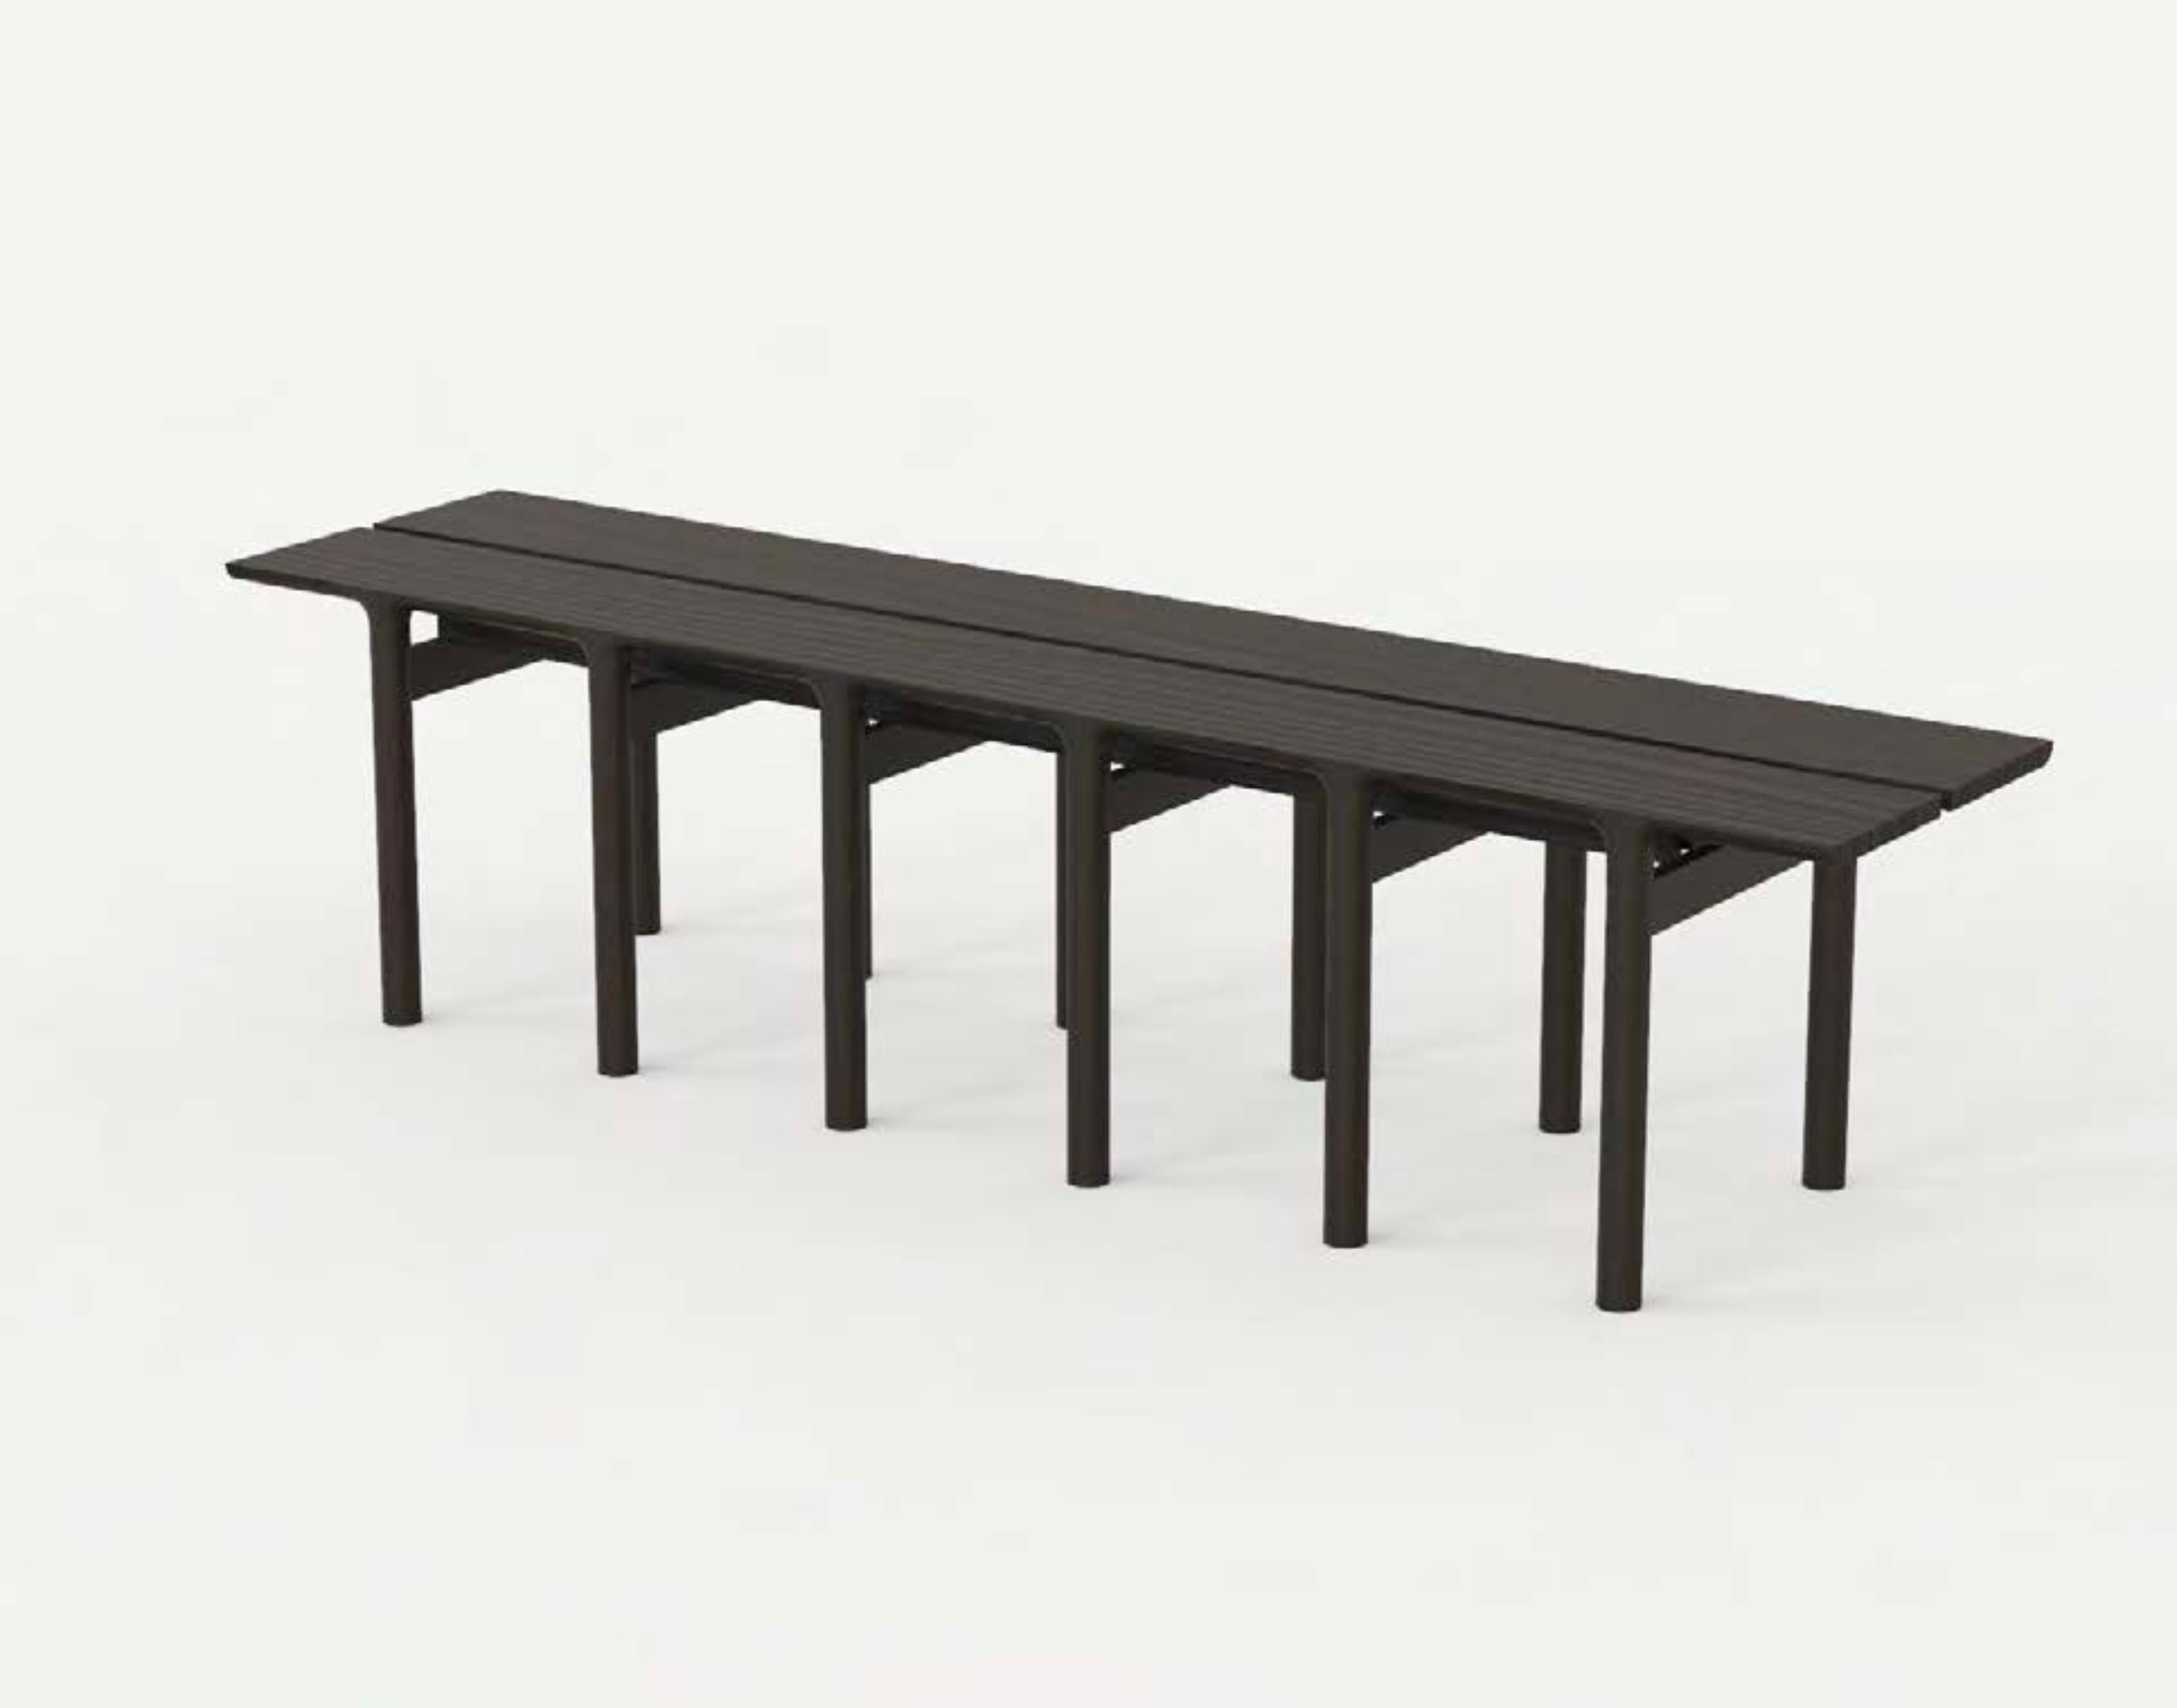 Cronos bench by Sebastián Ángeles
Dimensions: W 180 x D 42 x H 45 cm
Materials: Oak

Sebastián Angeles is an Industrial Designer originally from Mexico City who graduated from the Anáhuac Mexico University in 2017, but his career began years